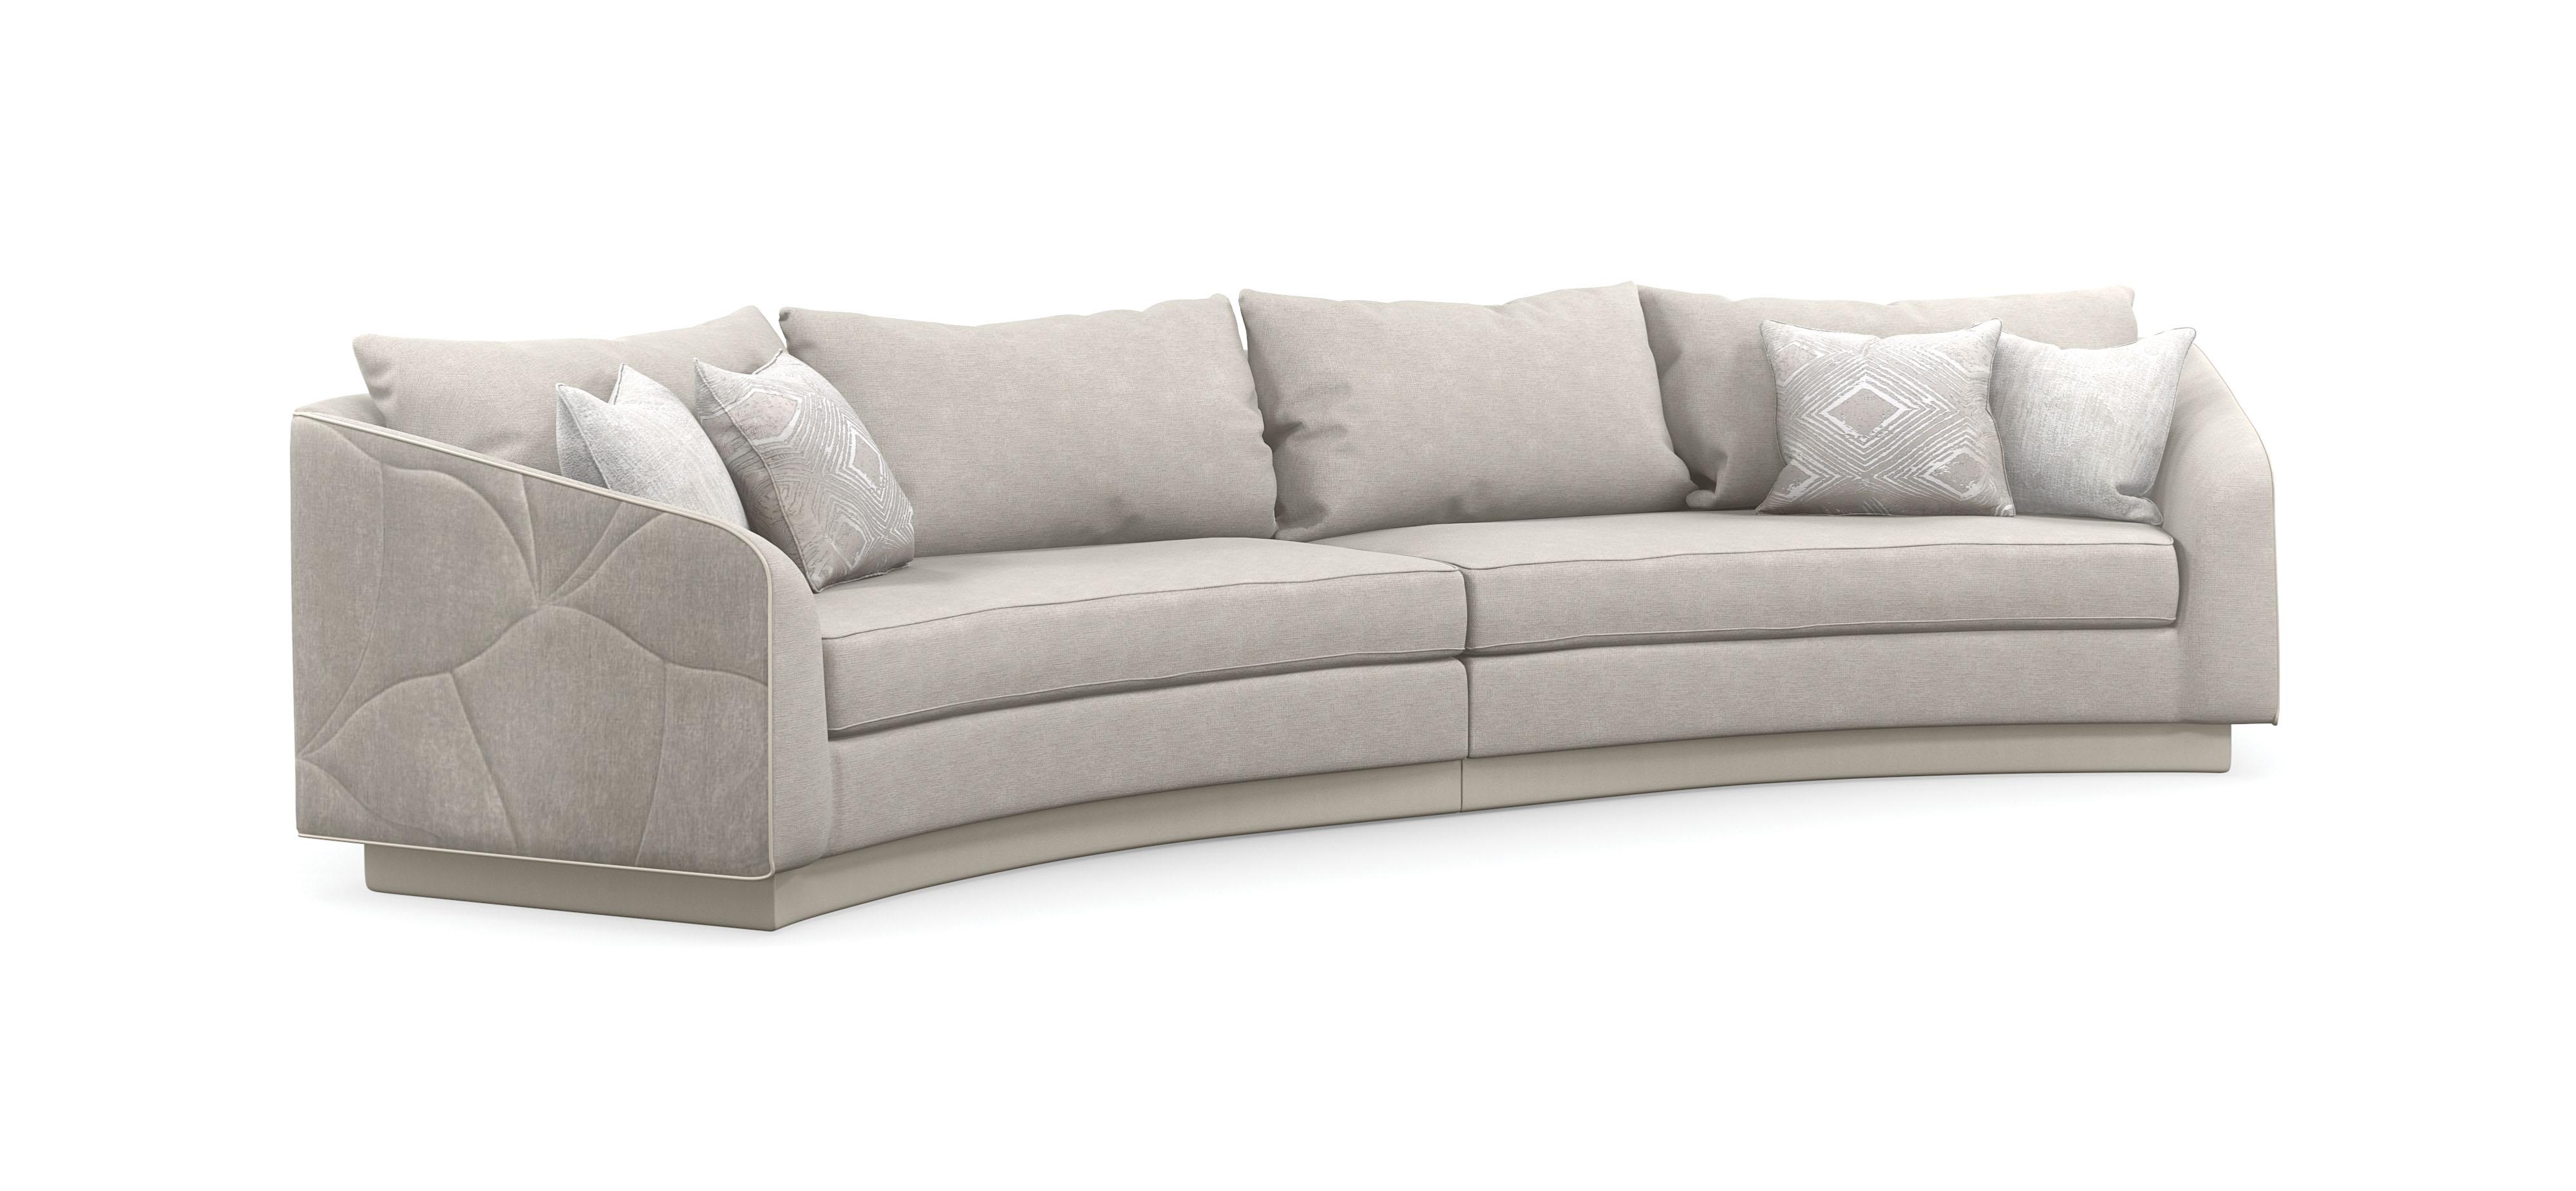 Contemporary Sectional Sofa Fanciful Loveseat UPH-020-SEC1-A in Gray Fabric